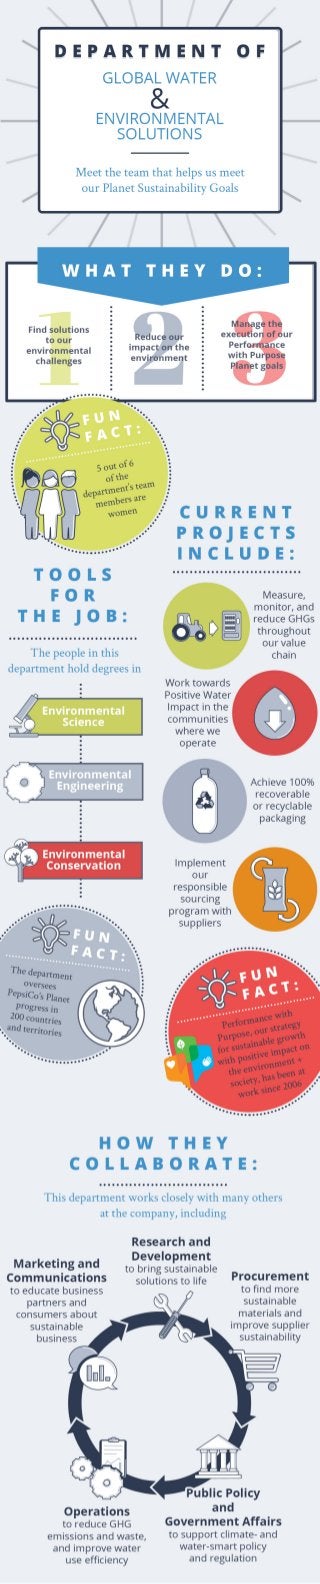 Discover Interesting Jobs with PepsiCo - Global Water & Environmental Solutions